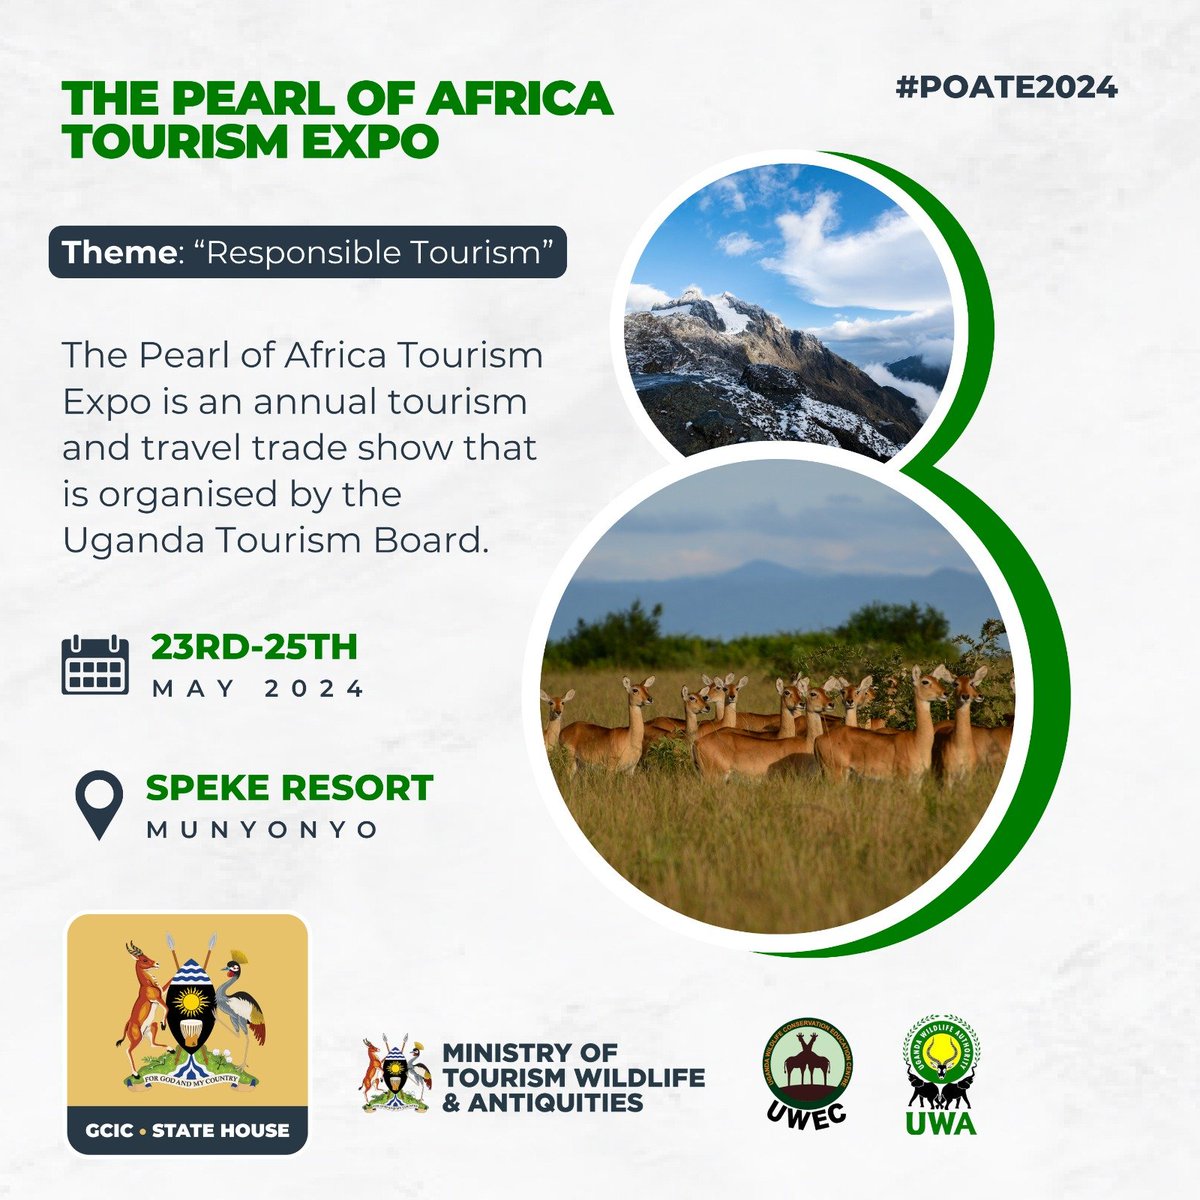 The Pearl of Africa Tourism Expo is on-going starting today 23rd-25th May 2024. Come interact with sector players and stakeholders in the industry @spekeresort #POATE2024 @TourismBoardUg @MTWAUganda @GCICUganda